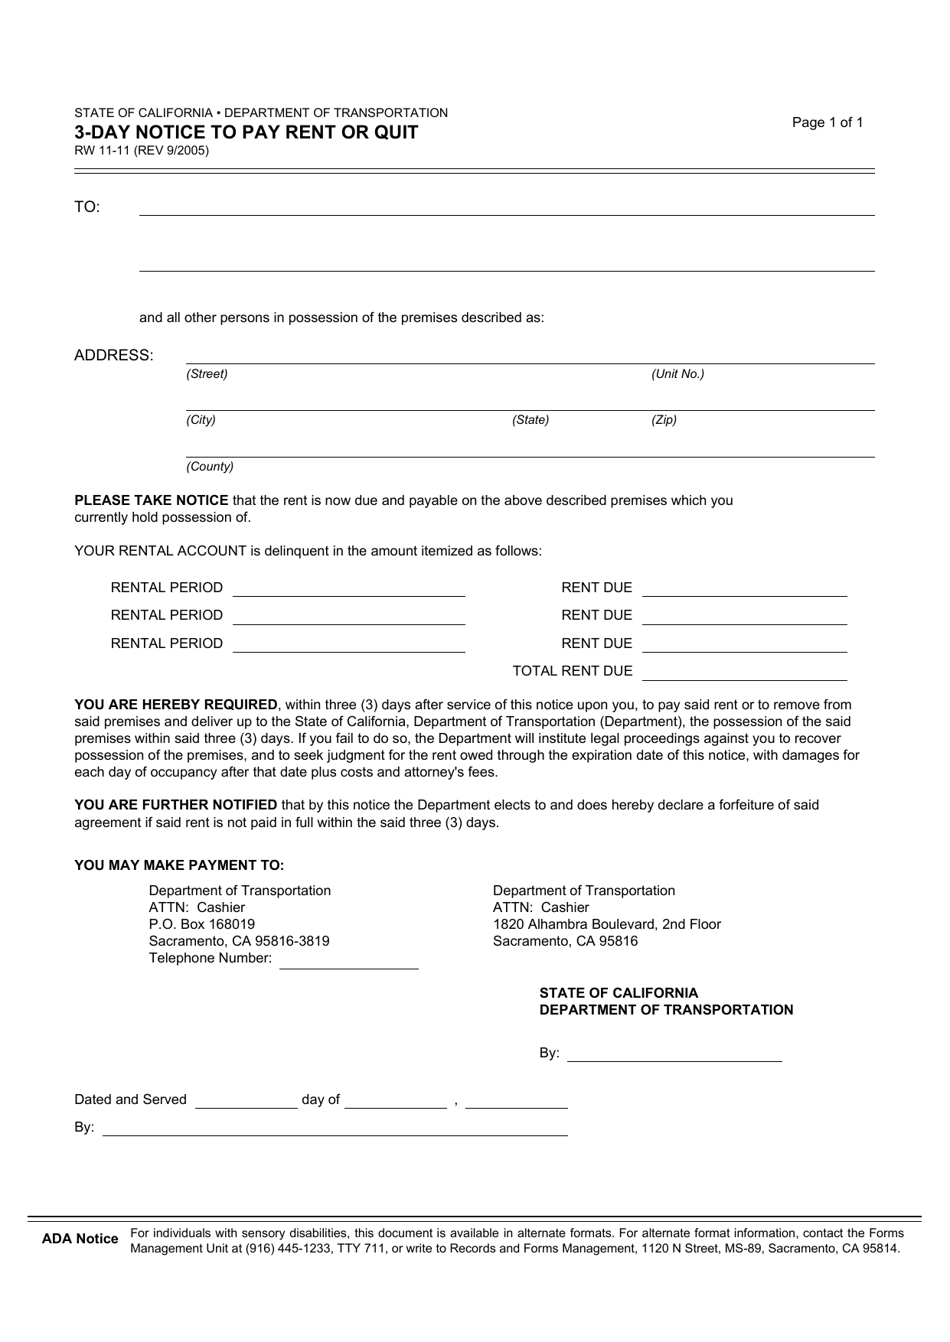 Form RW11-11 3-day Notice to Pay Rent or Quit - California, Page 1